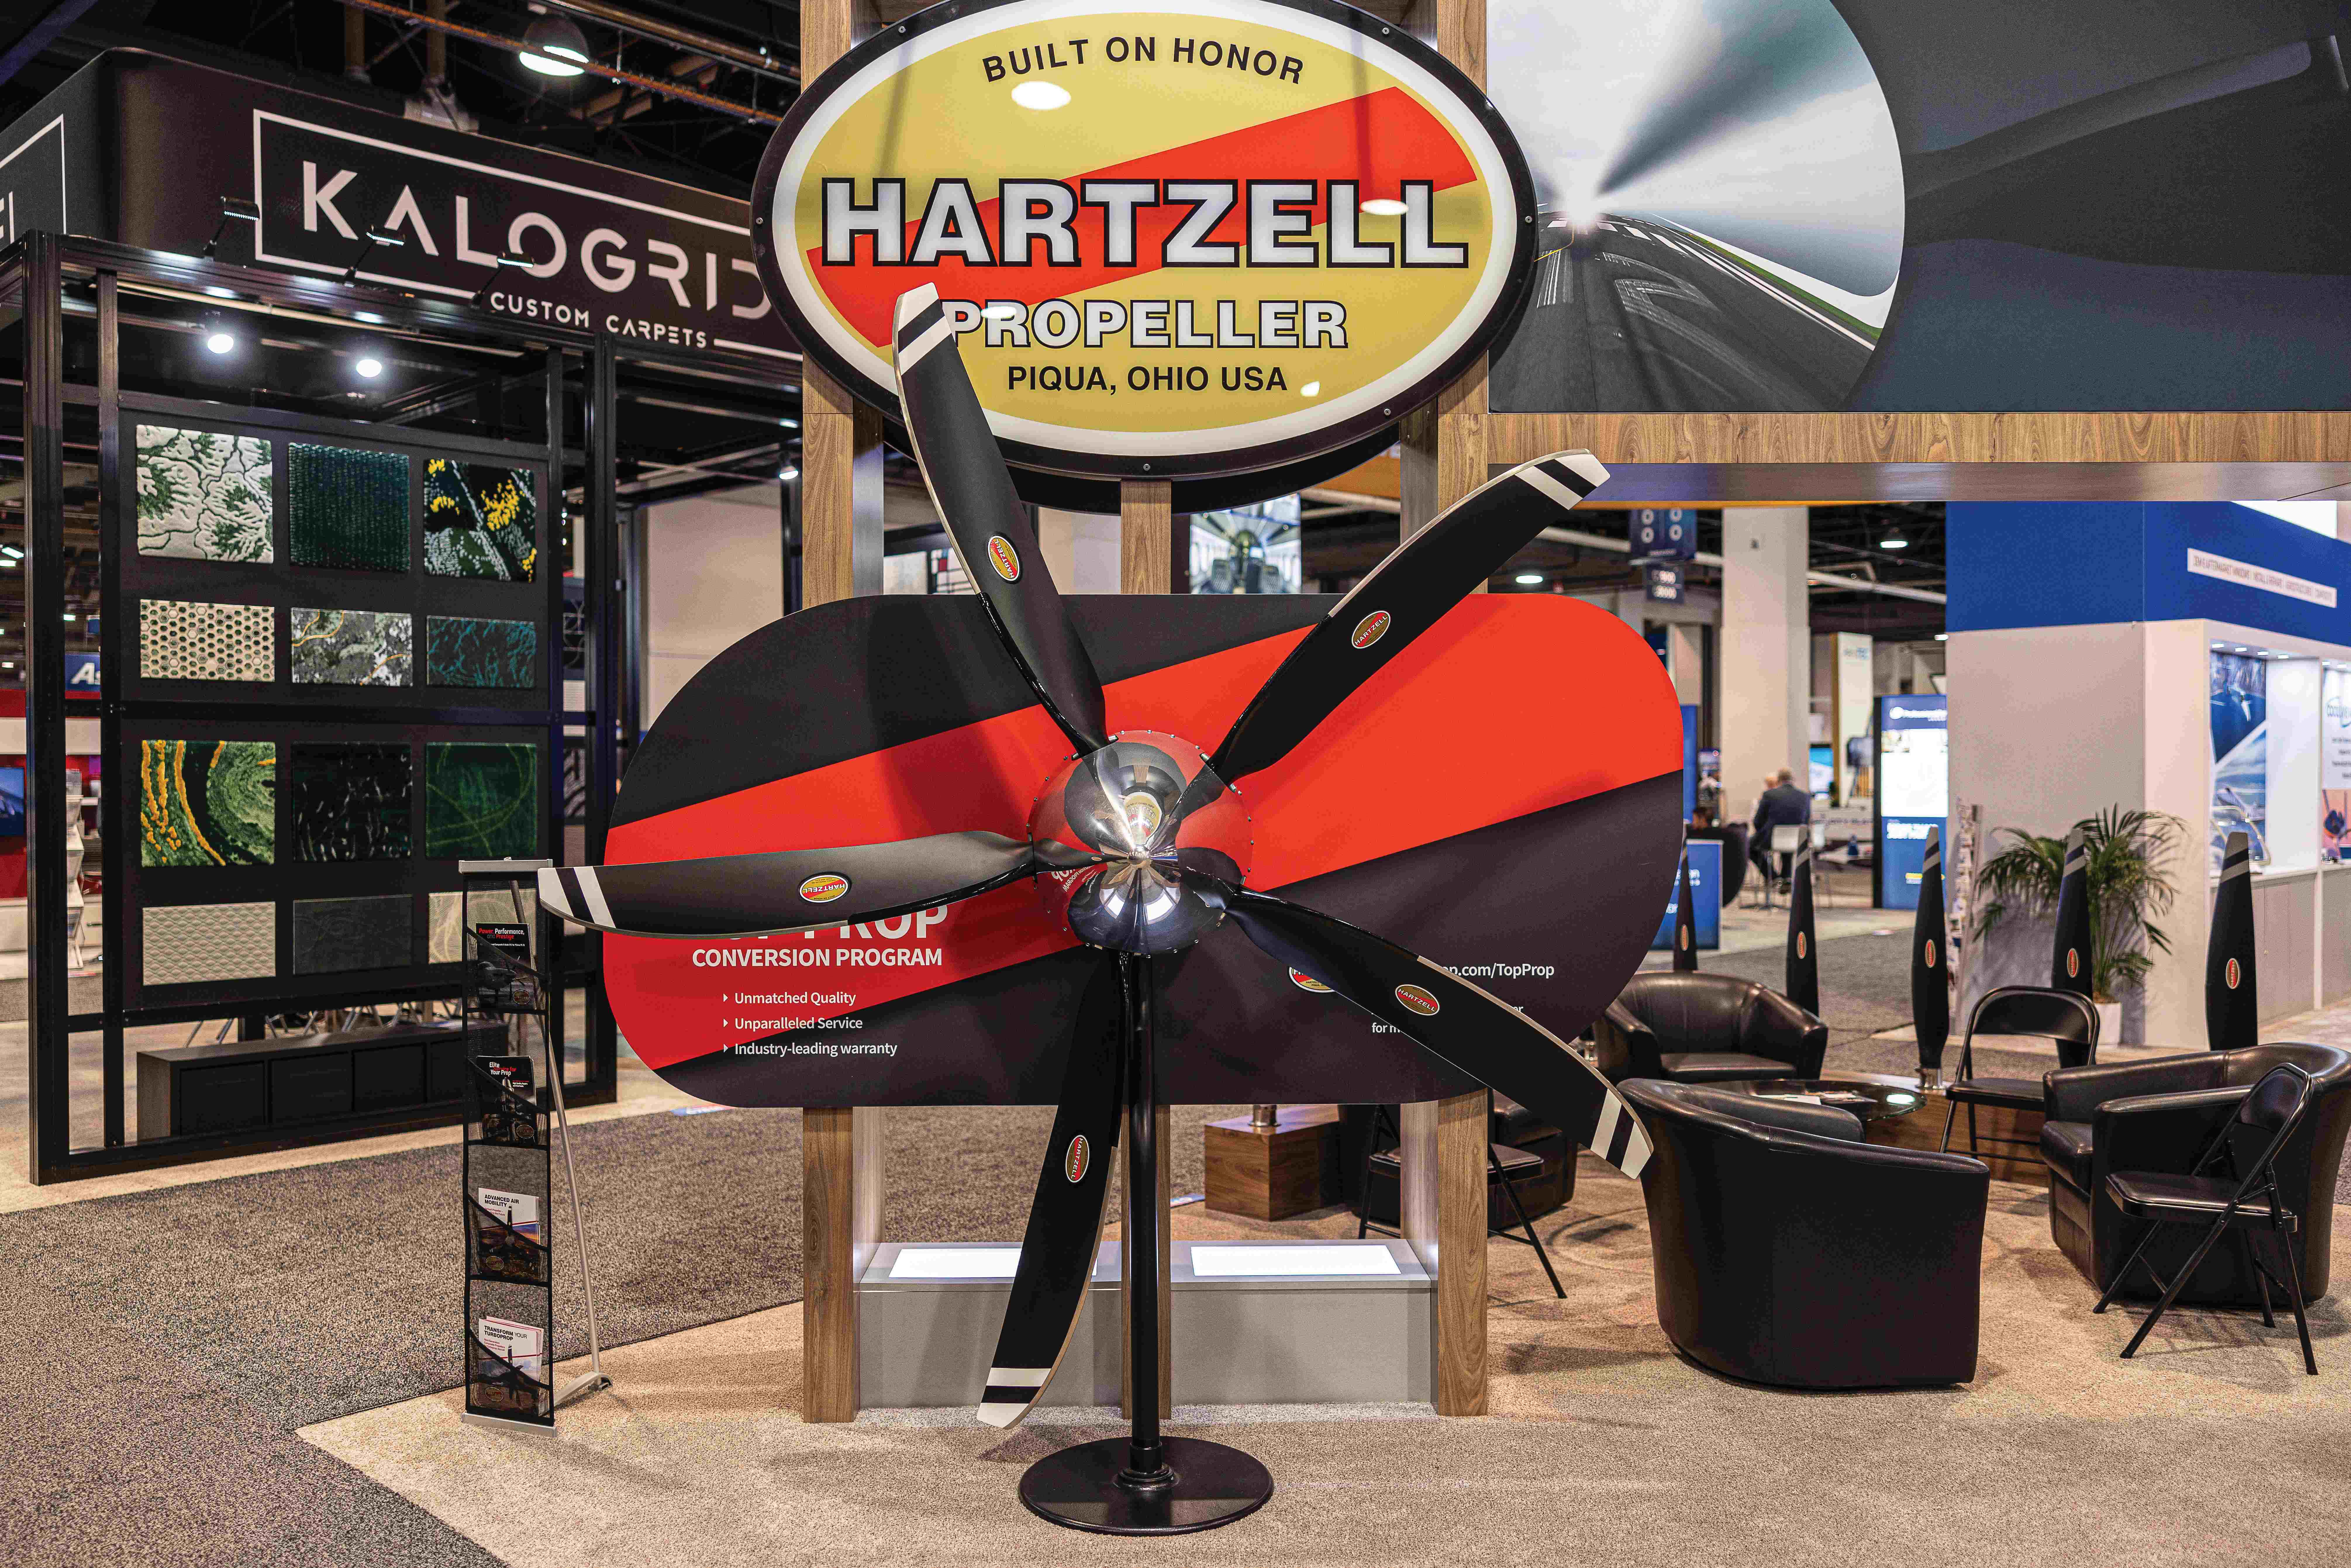 The Man Who Saved the Iconic Hartzell Propeller Company